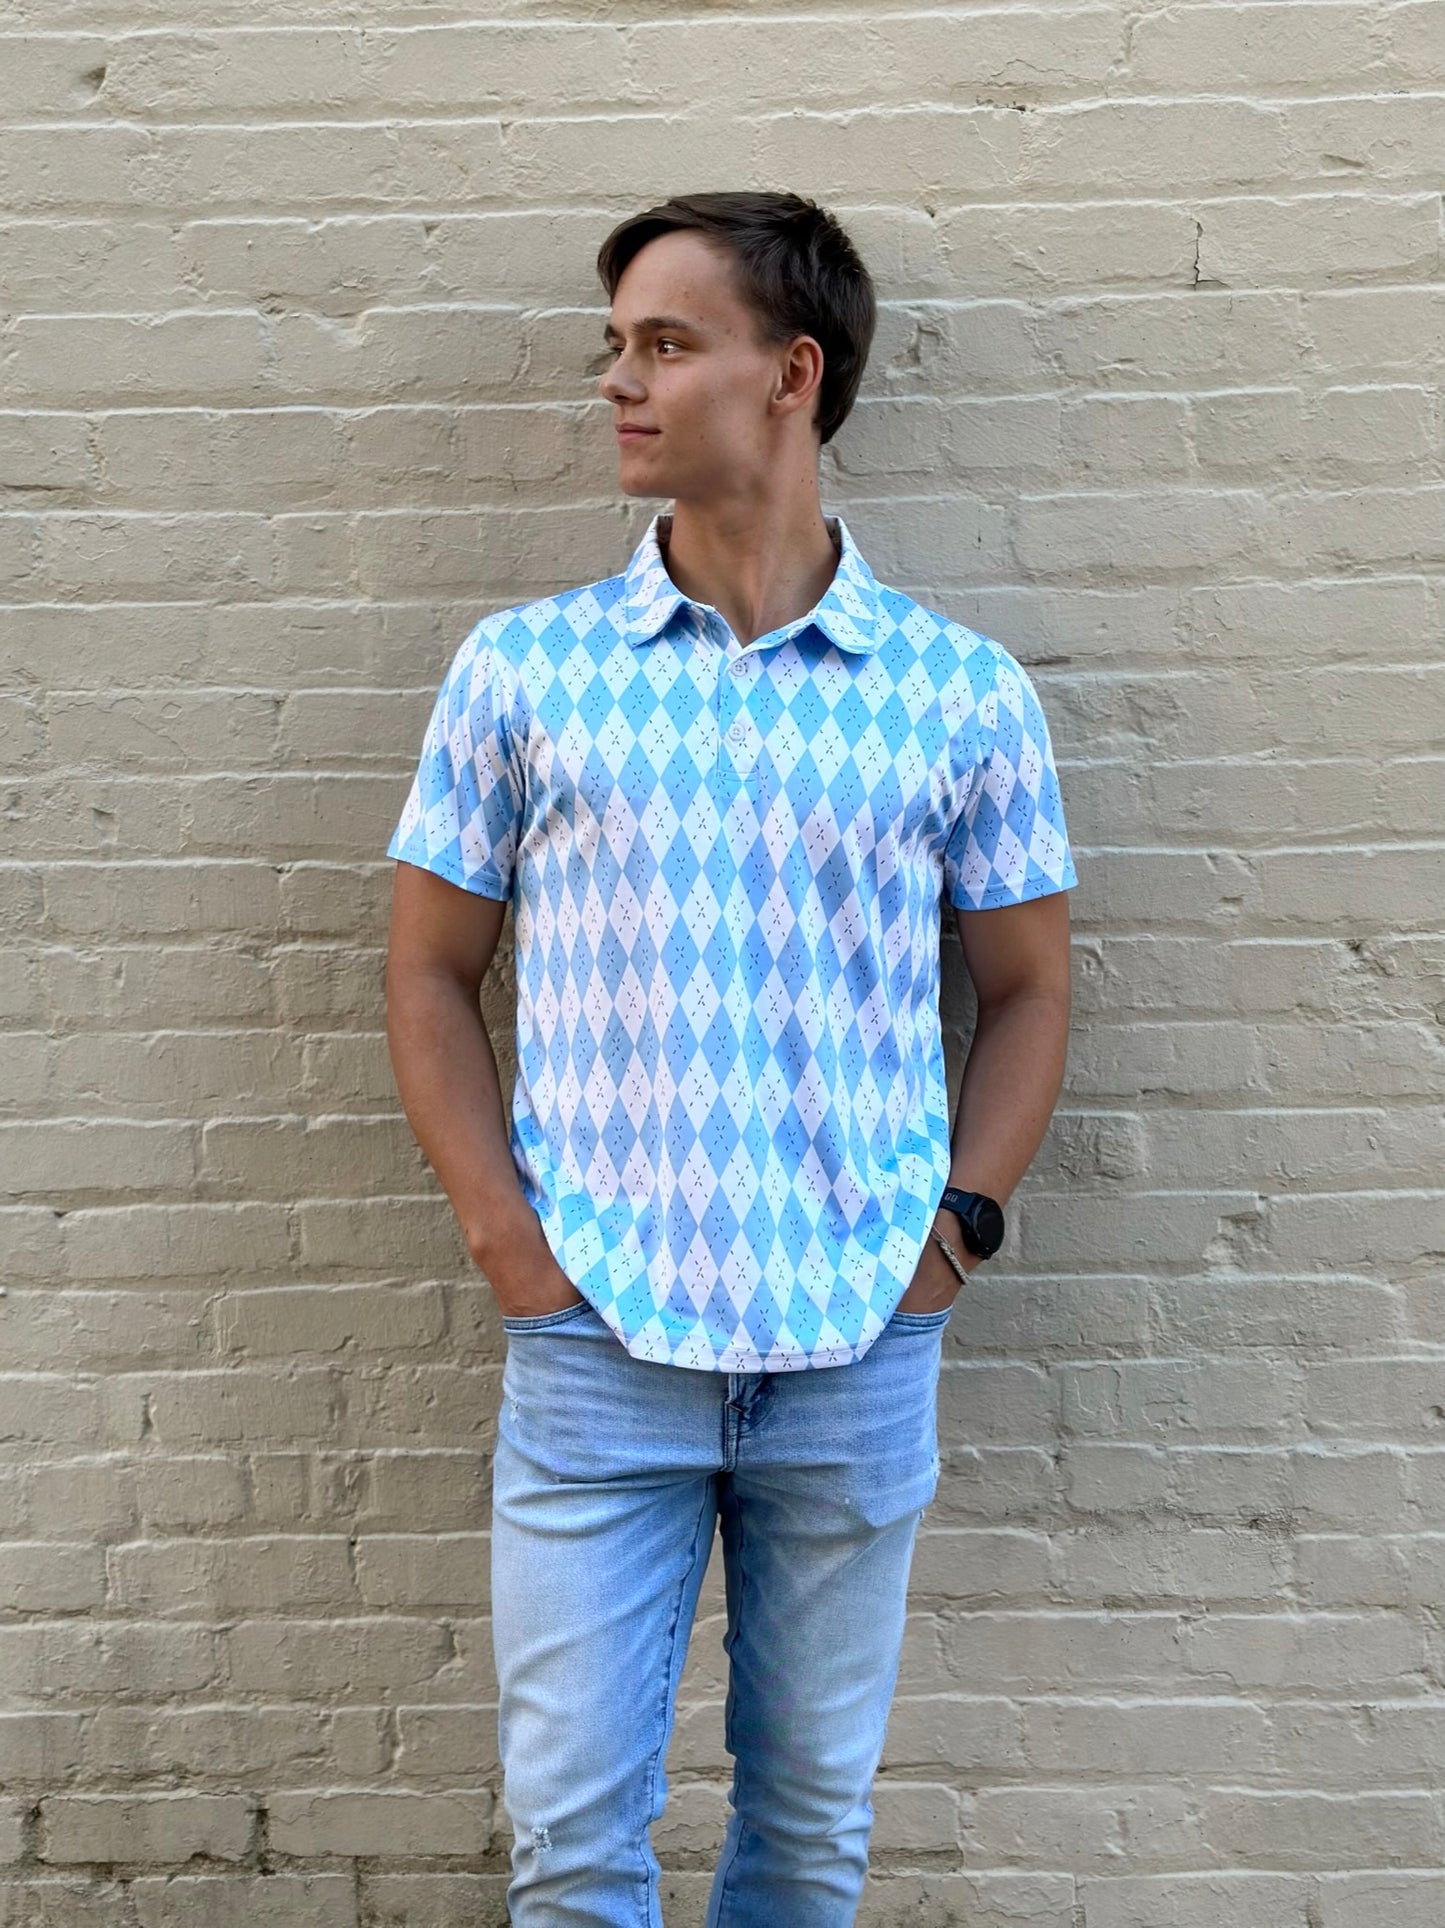 Carolina Blue and White Argyle Polo in Athletic Material